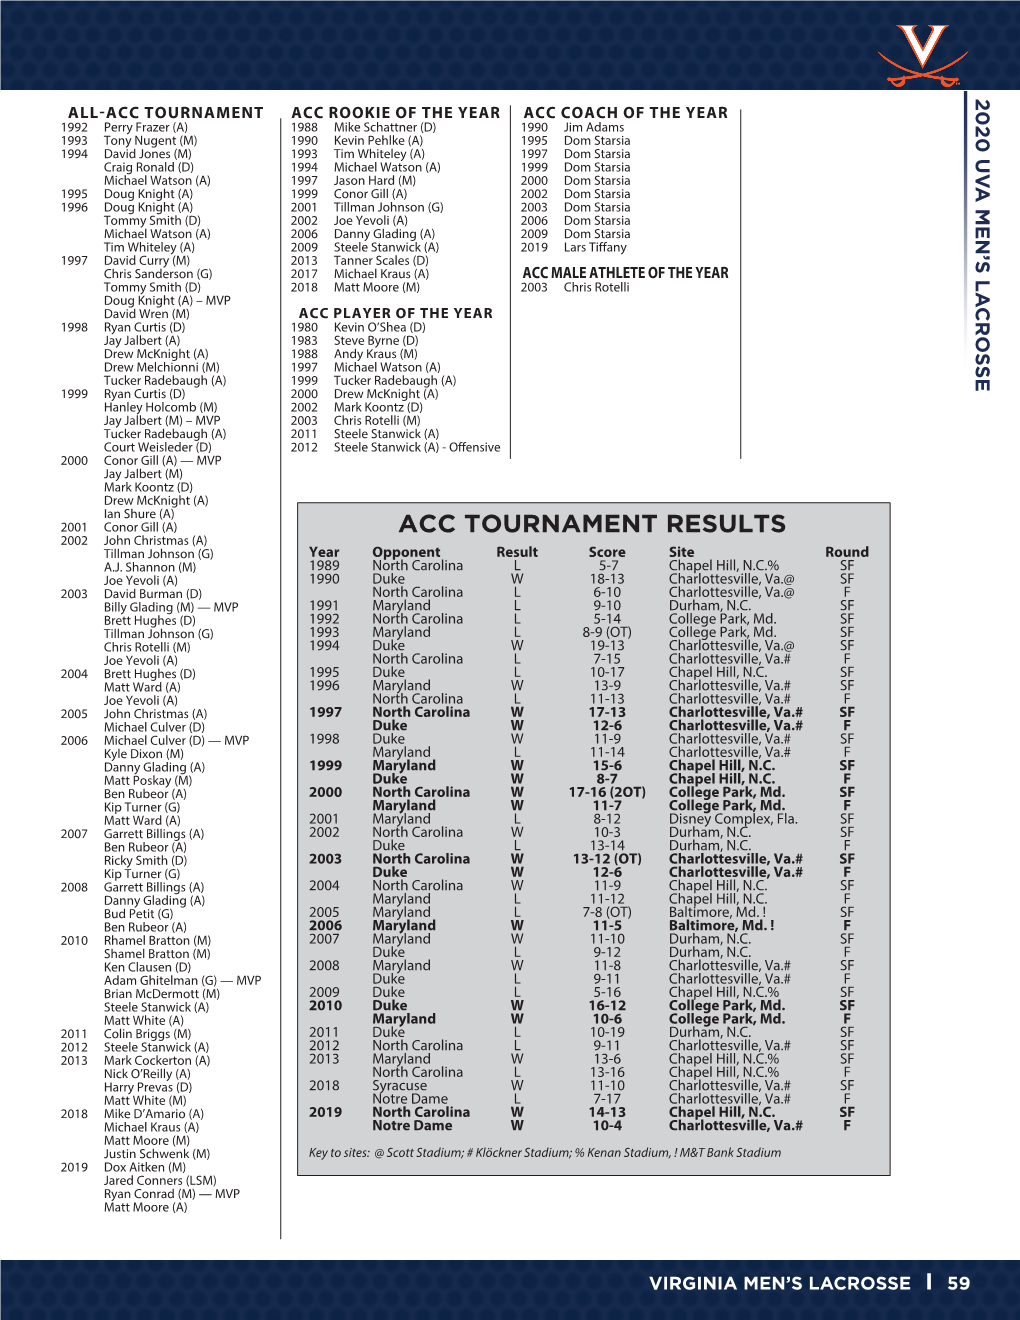 ACC TOURNAMENT RESULTS 2002 John Christmas (A) Tillman Johnson (G) Year Opponent Result Score Site Round A.J